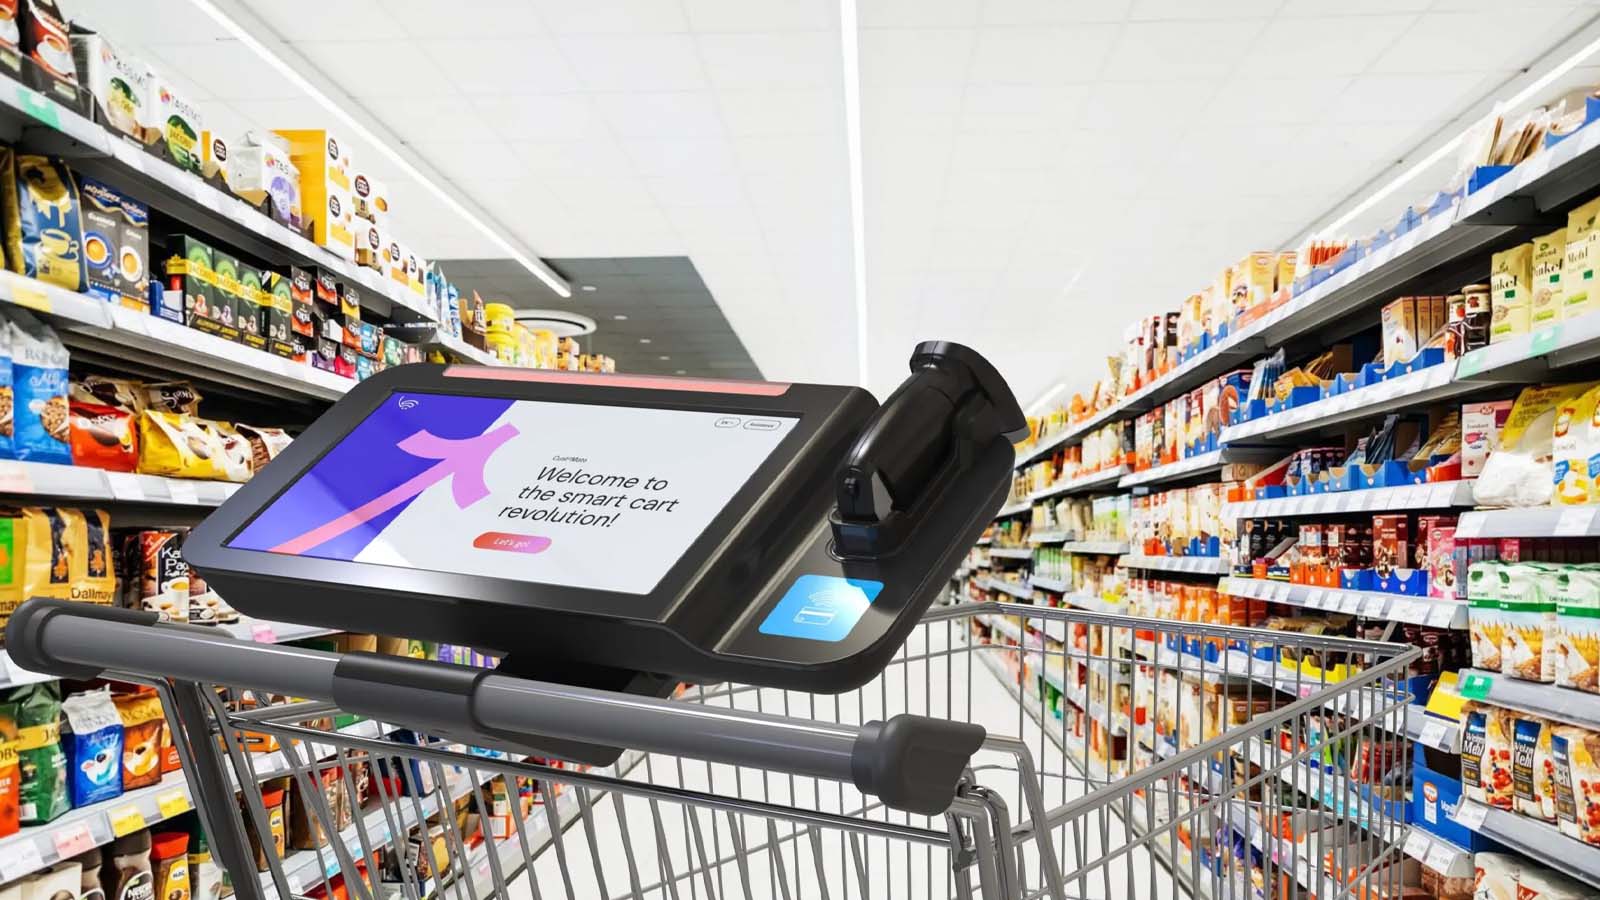 The Future of Retail, Part 2 - Tomorrow's Tech [The Food Institute]